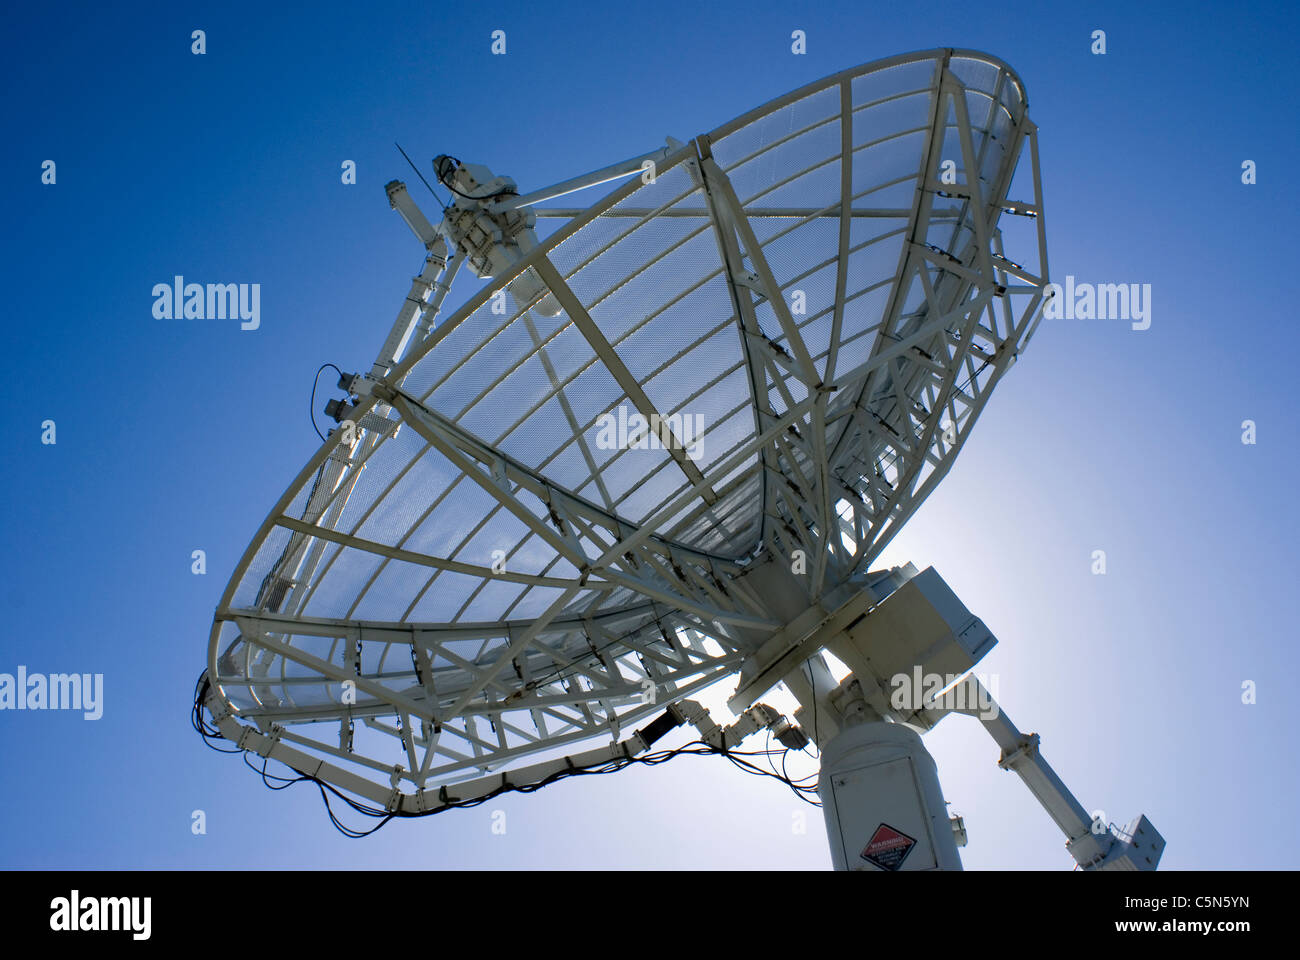 Satellite communications and telemetry antenna at Cape Canaveral Air Force  Space and Missile Museum, Florida, USA Stock Photo - Alamy